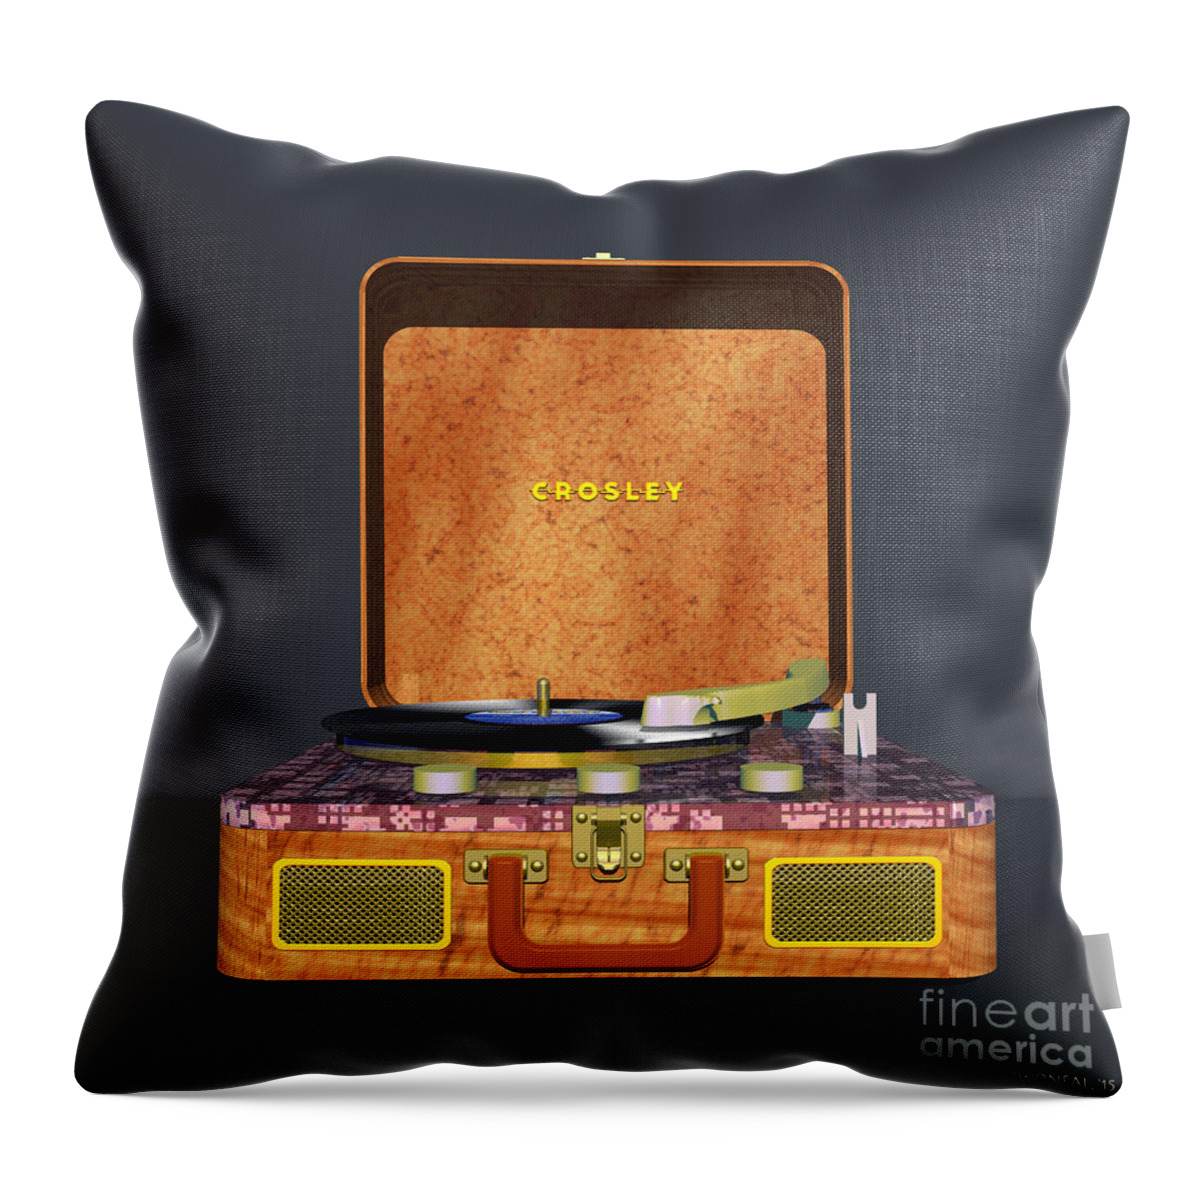 Playing Devices Throw Pillow featuring the digital art The Crosley Traveler - A Vintage Portable Turntable by Walter Neal